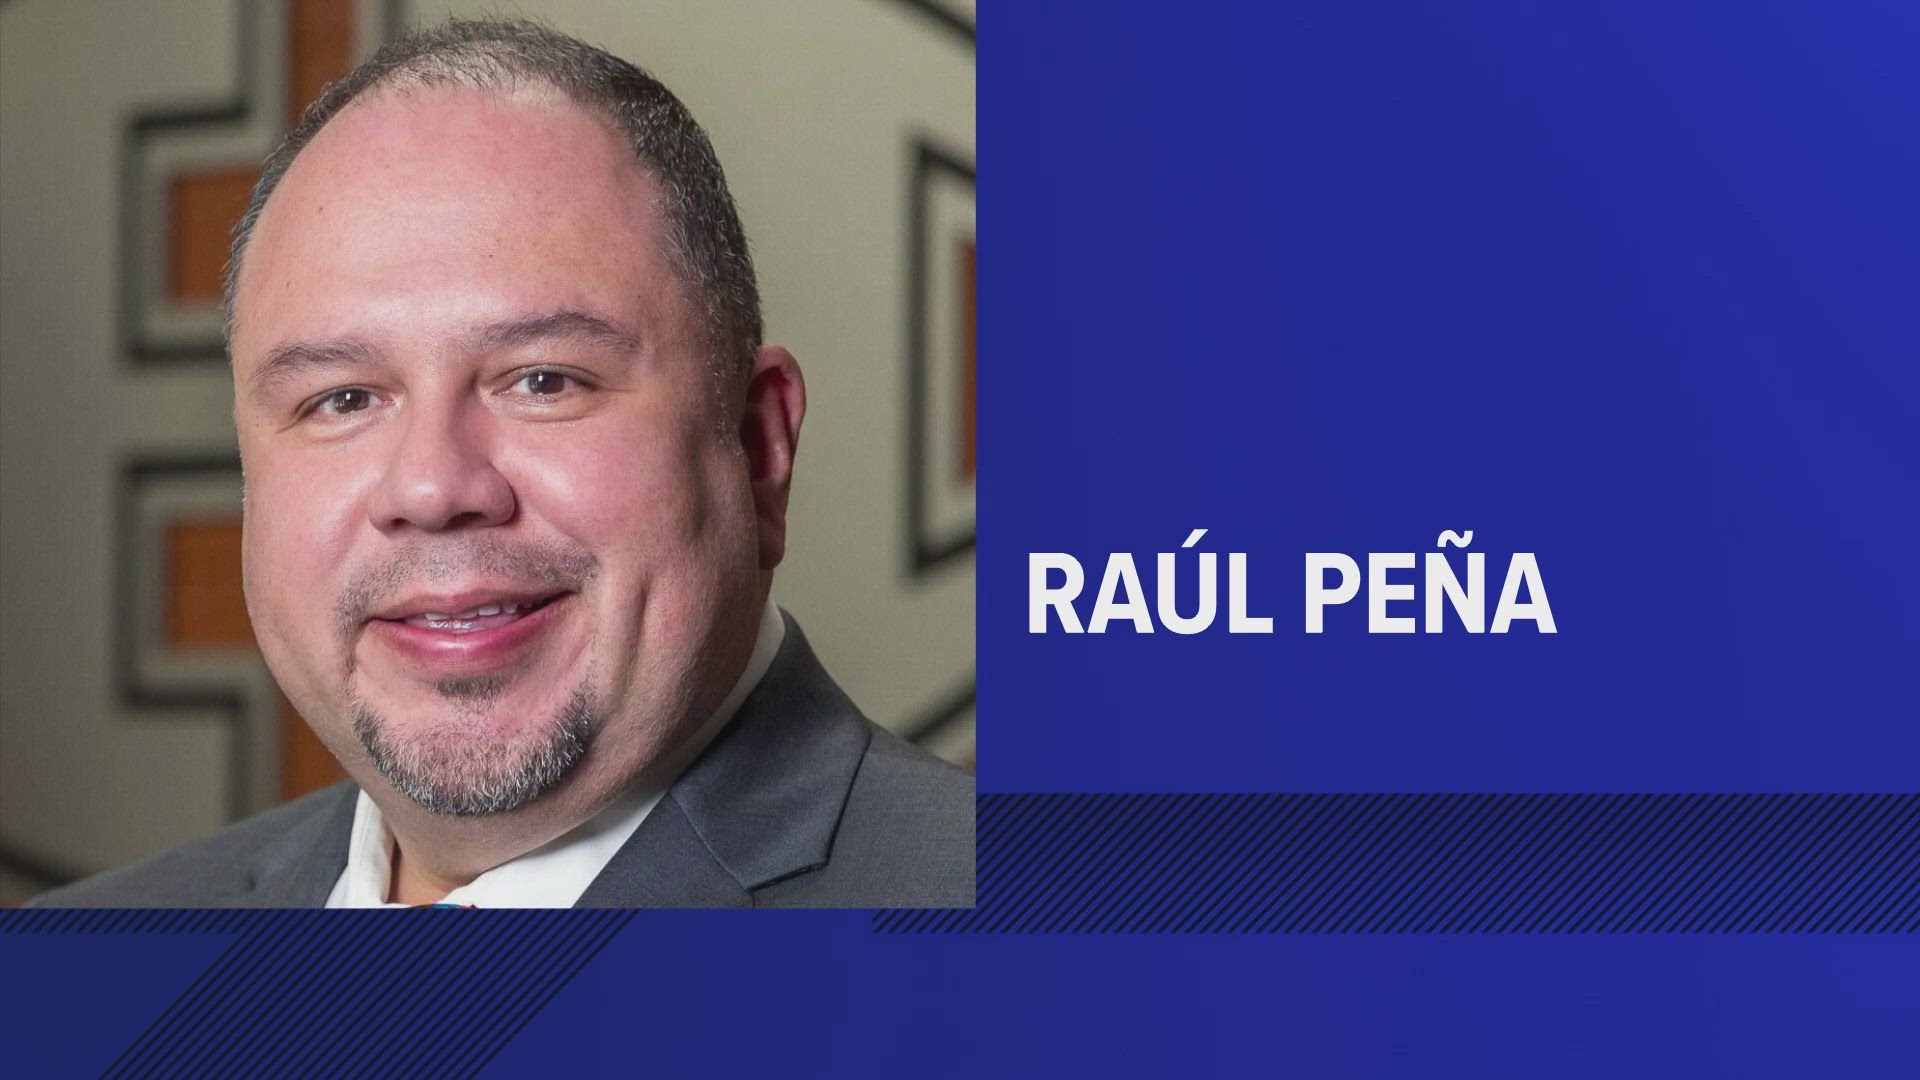 Dr. Raul Pena became the district's superintendent in September 2023.